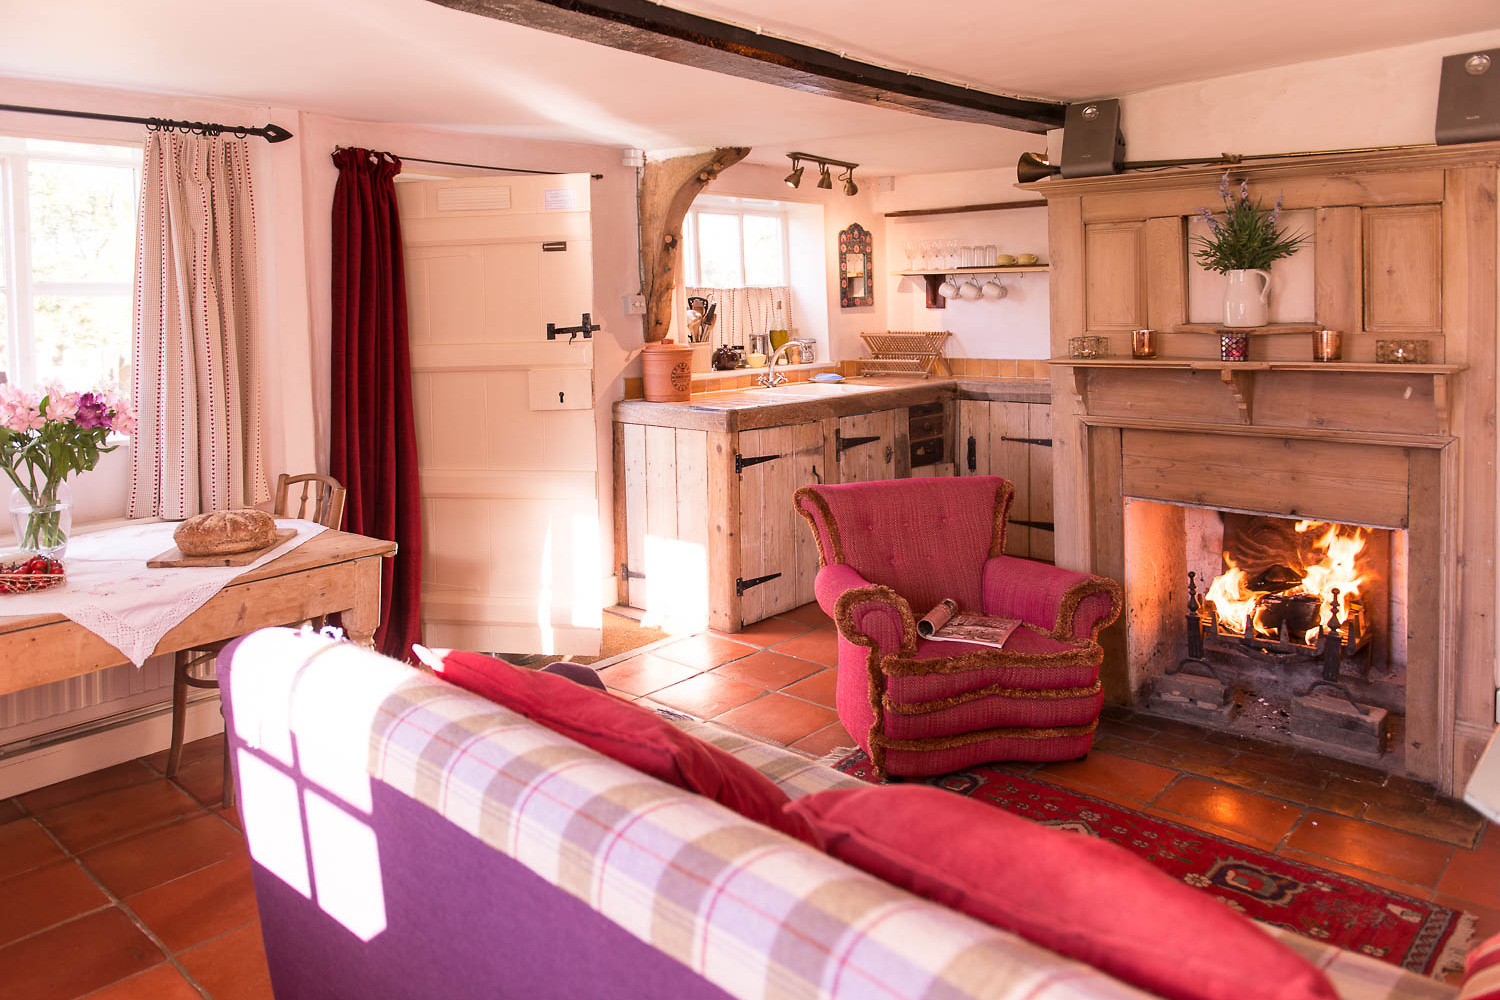 Awarded 4 Star Gold For All Our Cottages Here At The Grove Farm! -